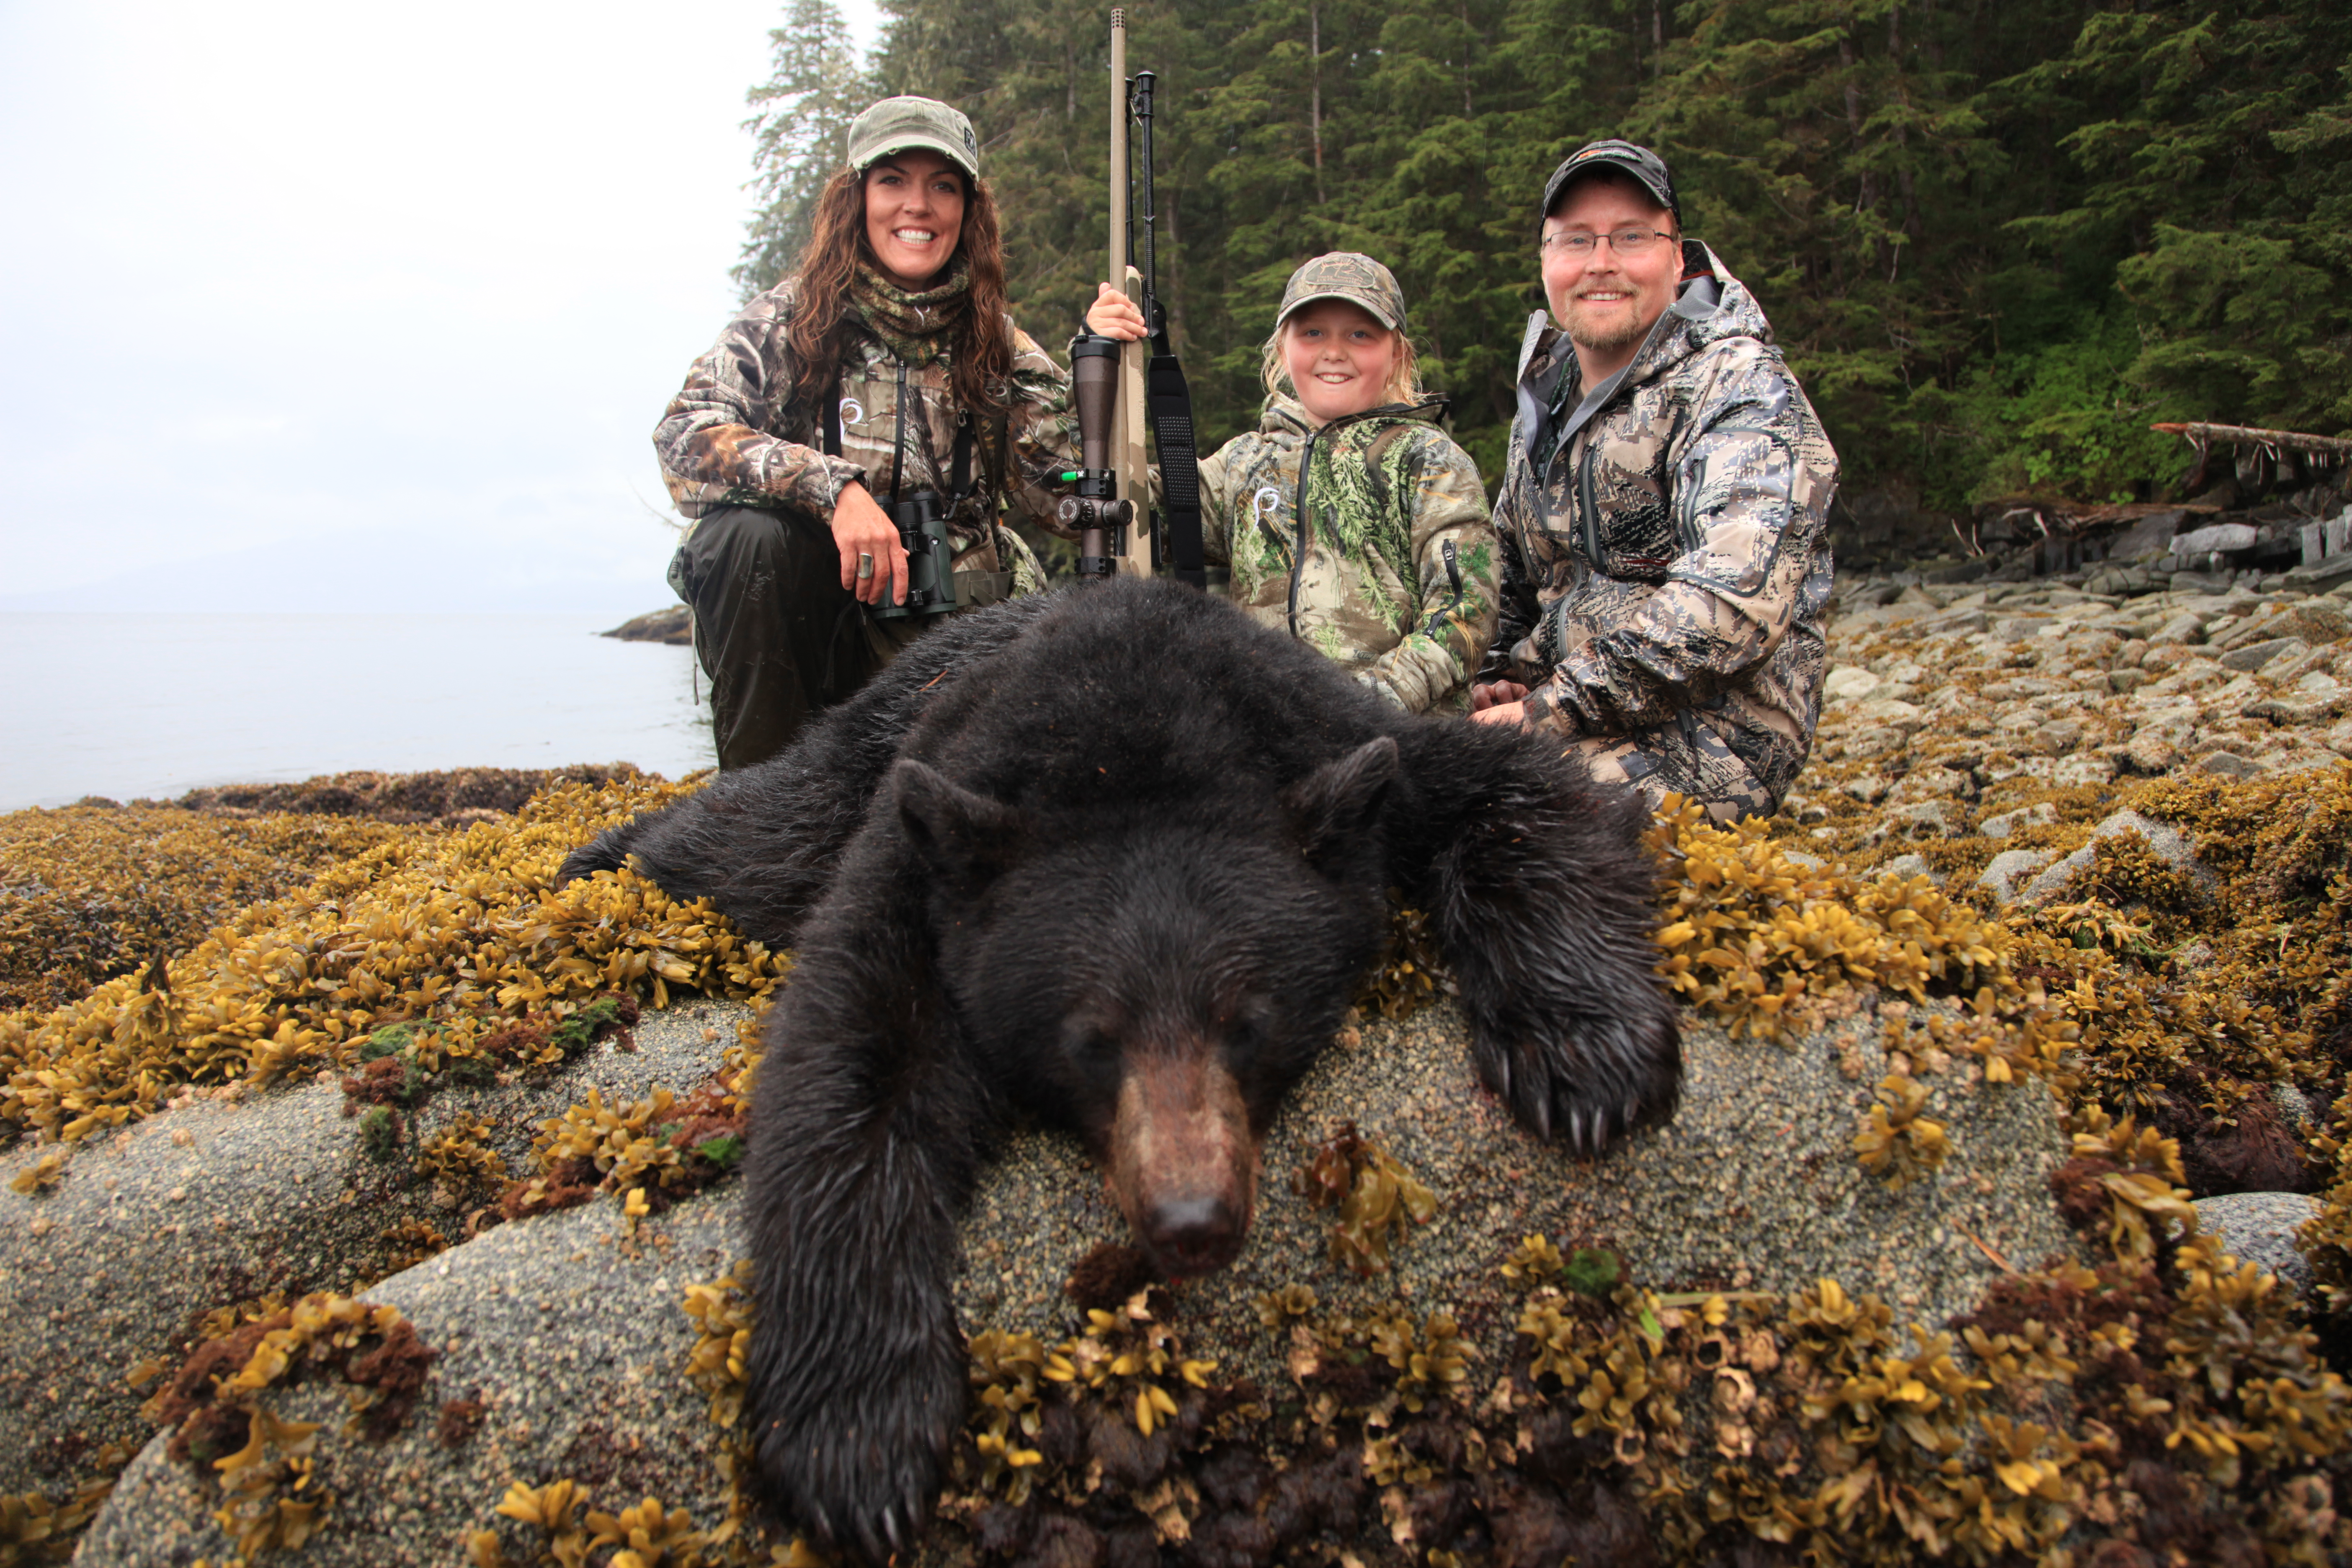 Ten Year-Old Taylor Wohlers Had Her First Bear Hunt Featured on Skull ...